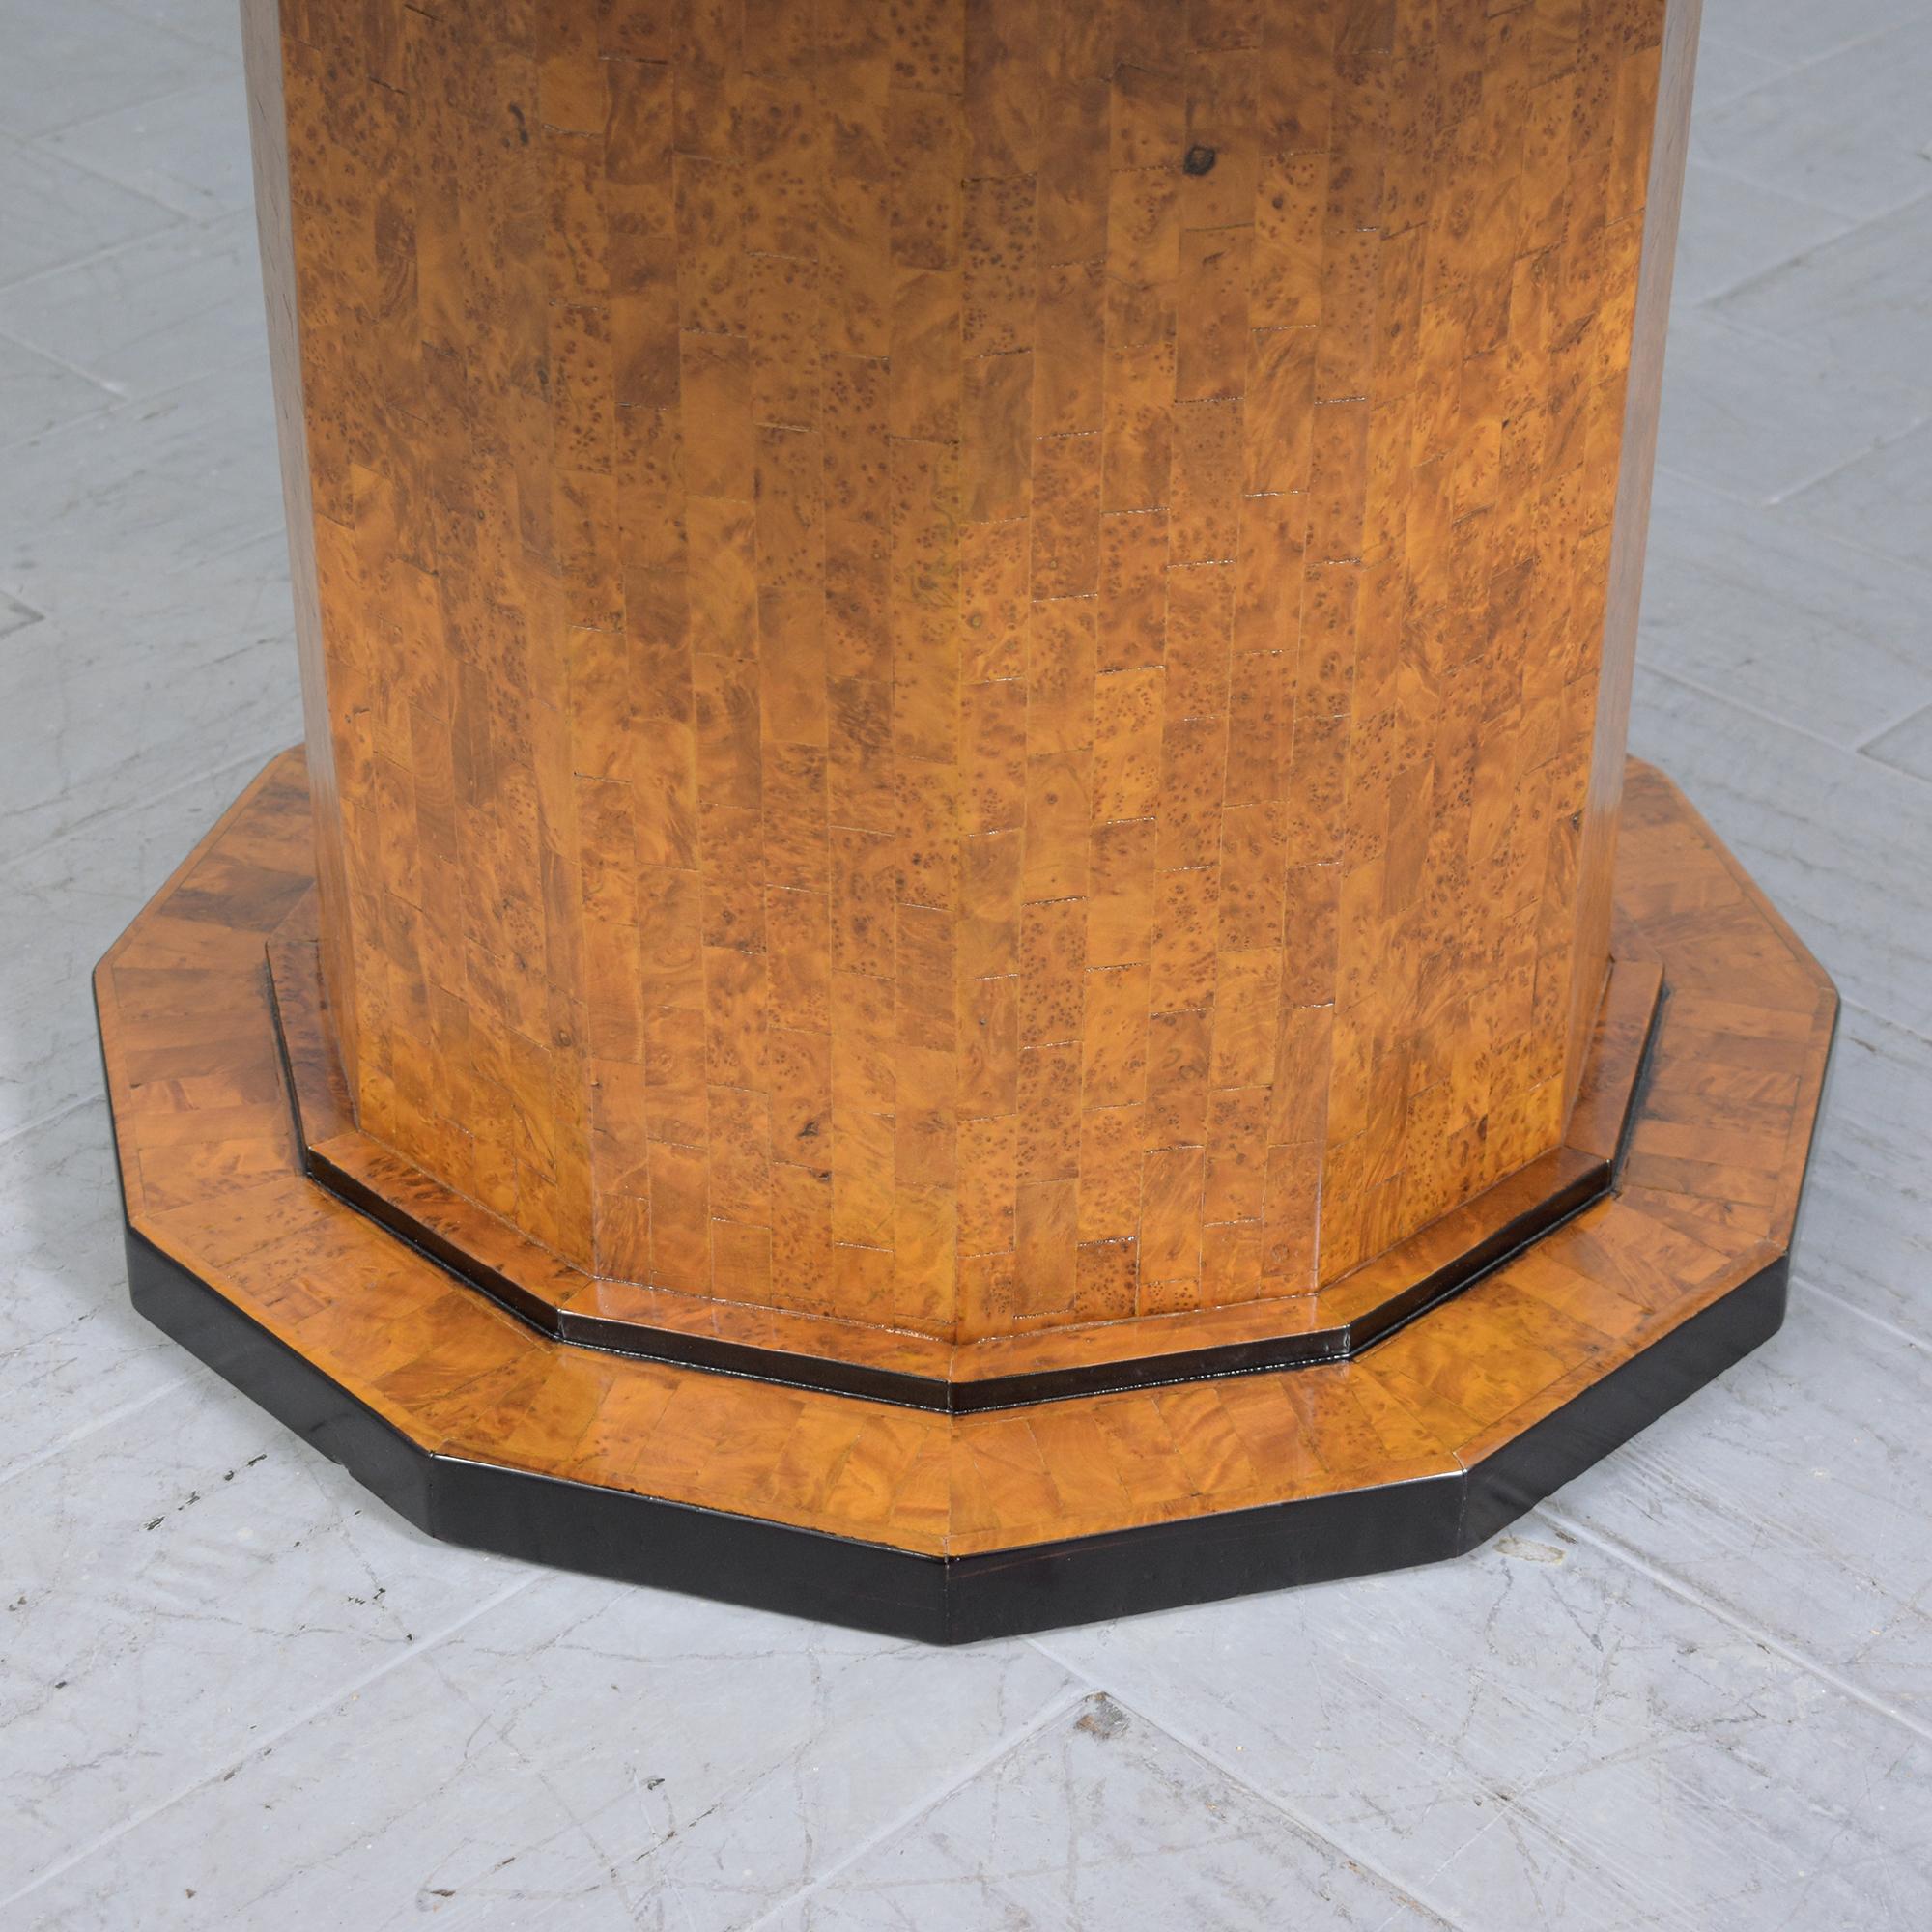 1880s Restored Walnut Veneer Center Table with Mother-of-Pearl Inlays For Sale 3